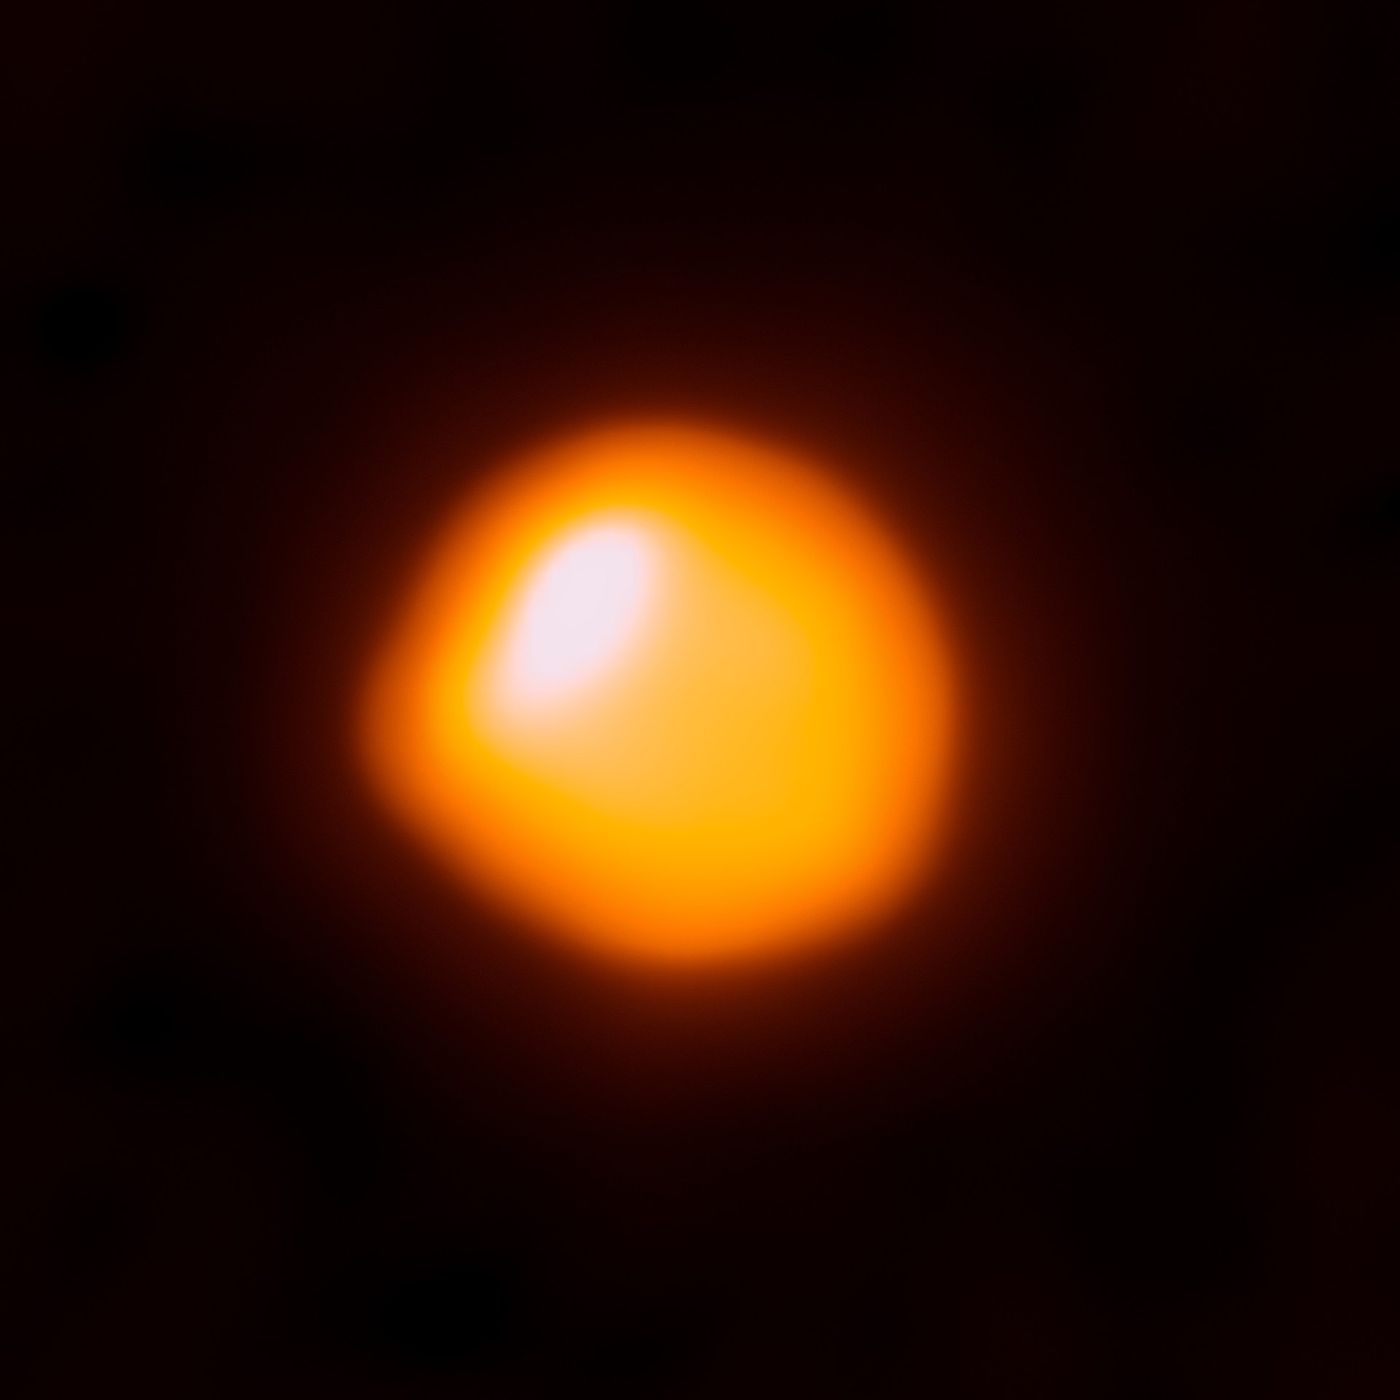 A high-resolution image of Betelgeuse captured by the Atacama Large Milimeter/submilimeter Array (ALMA).